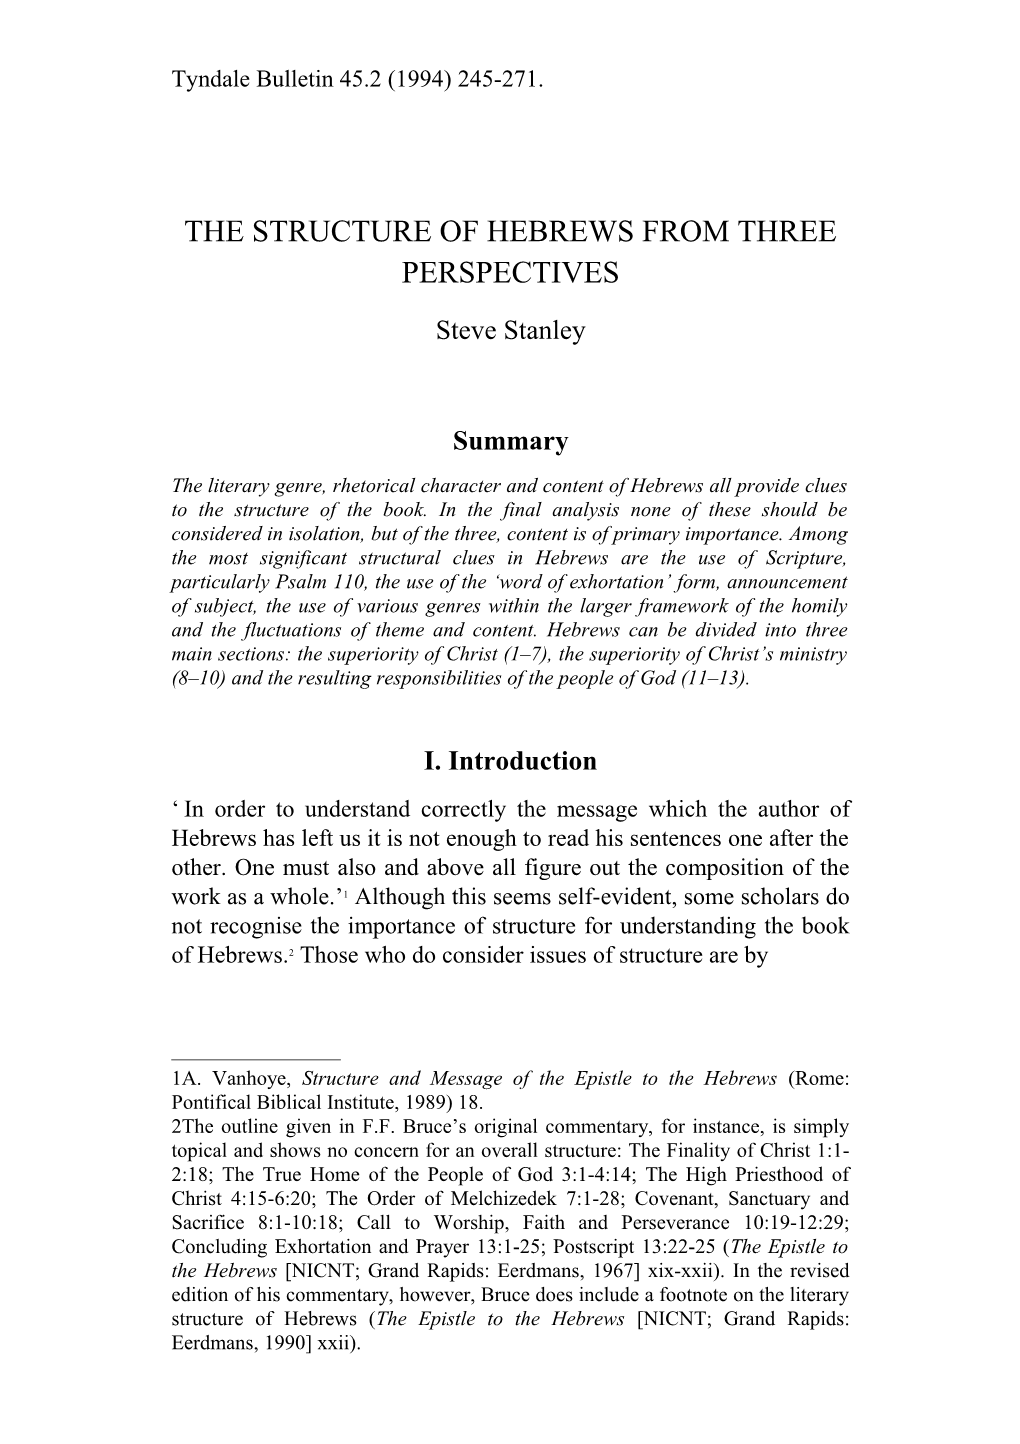 The Structure of Hebrews from Three Perspectives